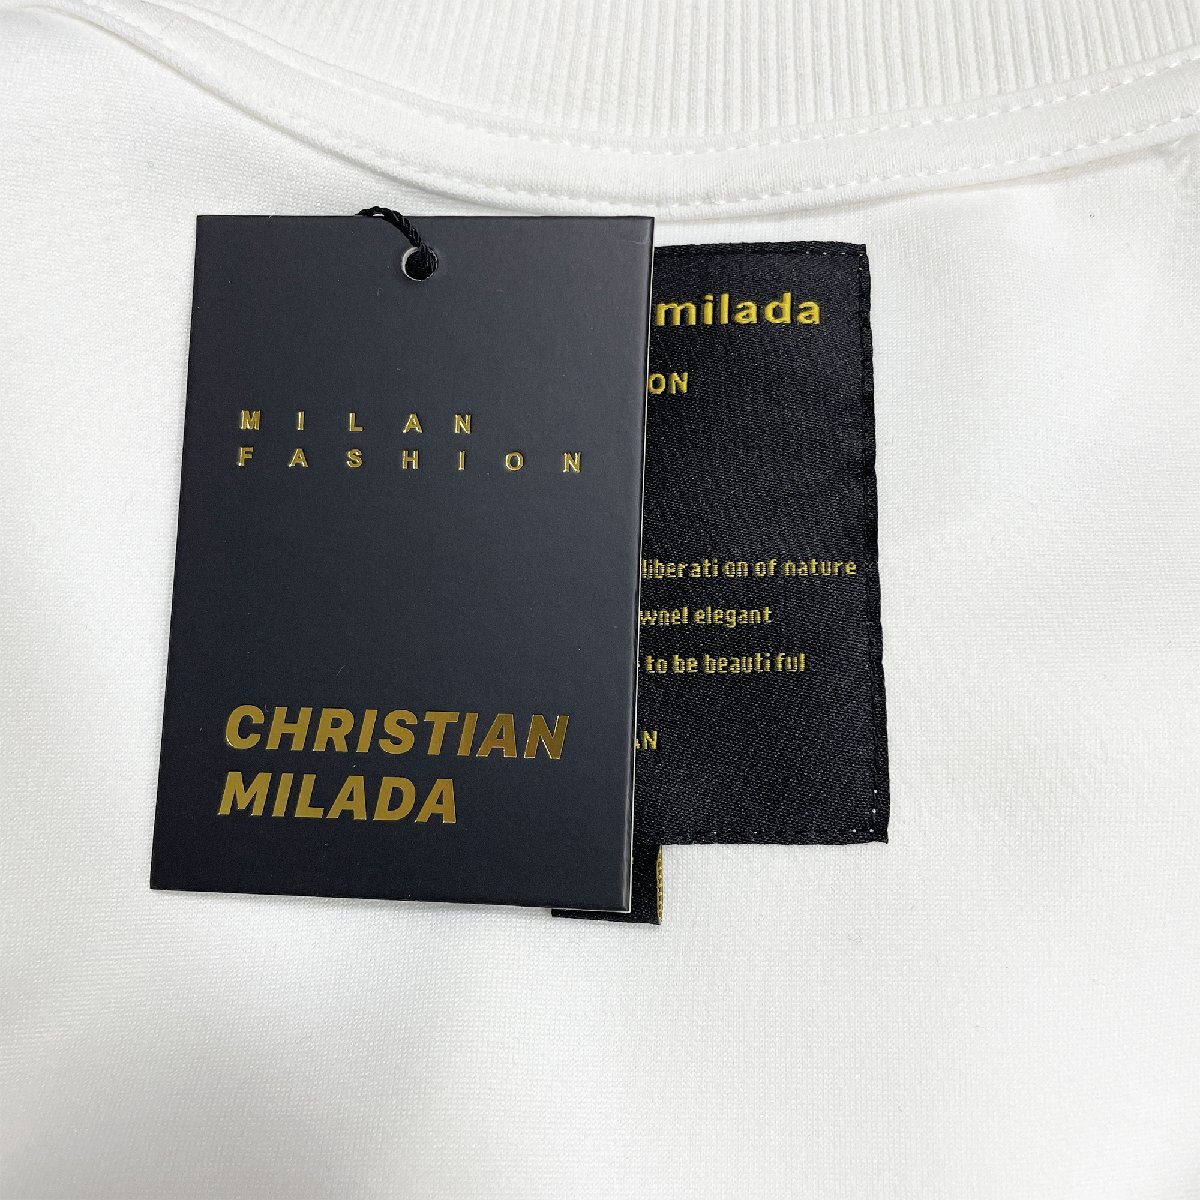  regular price 4 ten thousand *christian milada* milano departure * sweatshirt * cotton 100% piece . soft comfortable cut and sewn playing heart pretty everyday cup ruXL/50